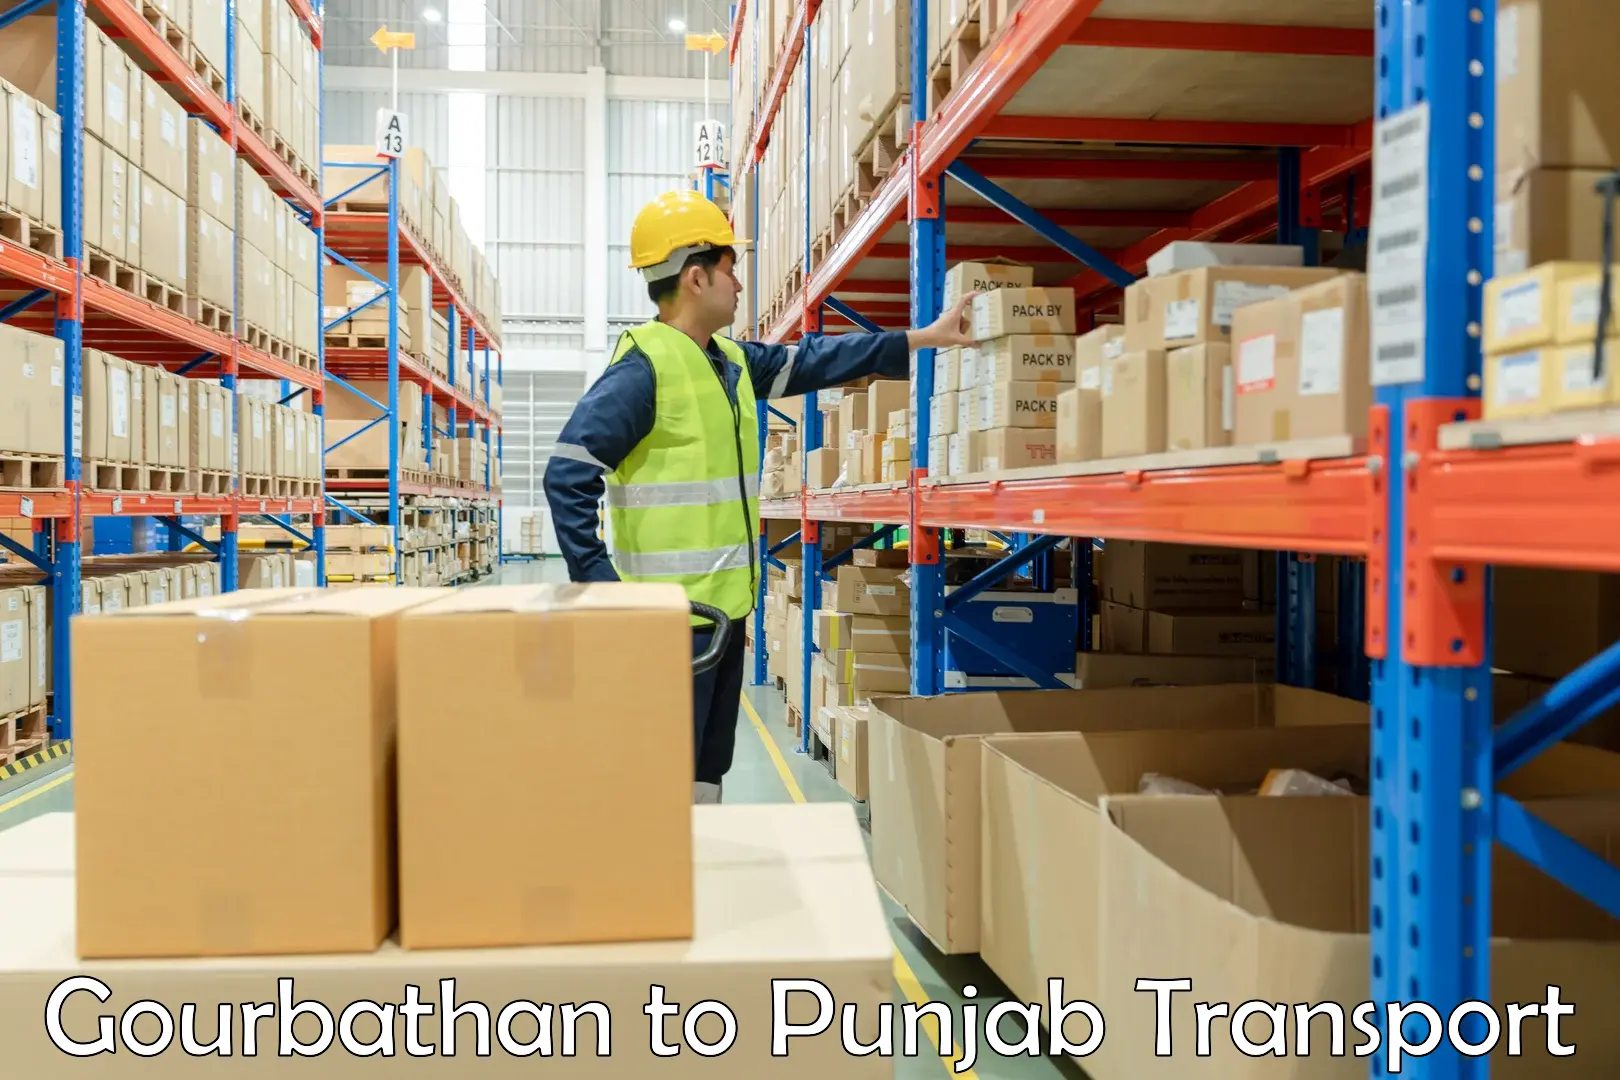 Commercial transport service Gourbathan to Patiala